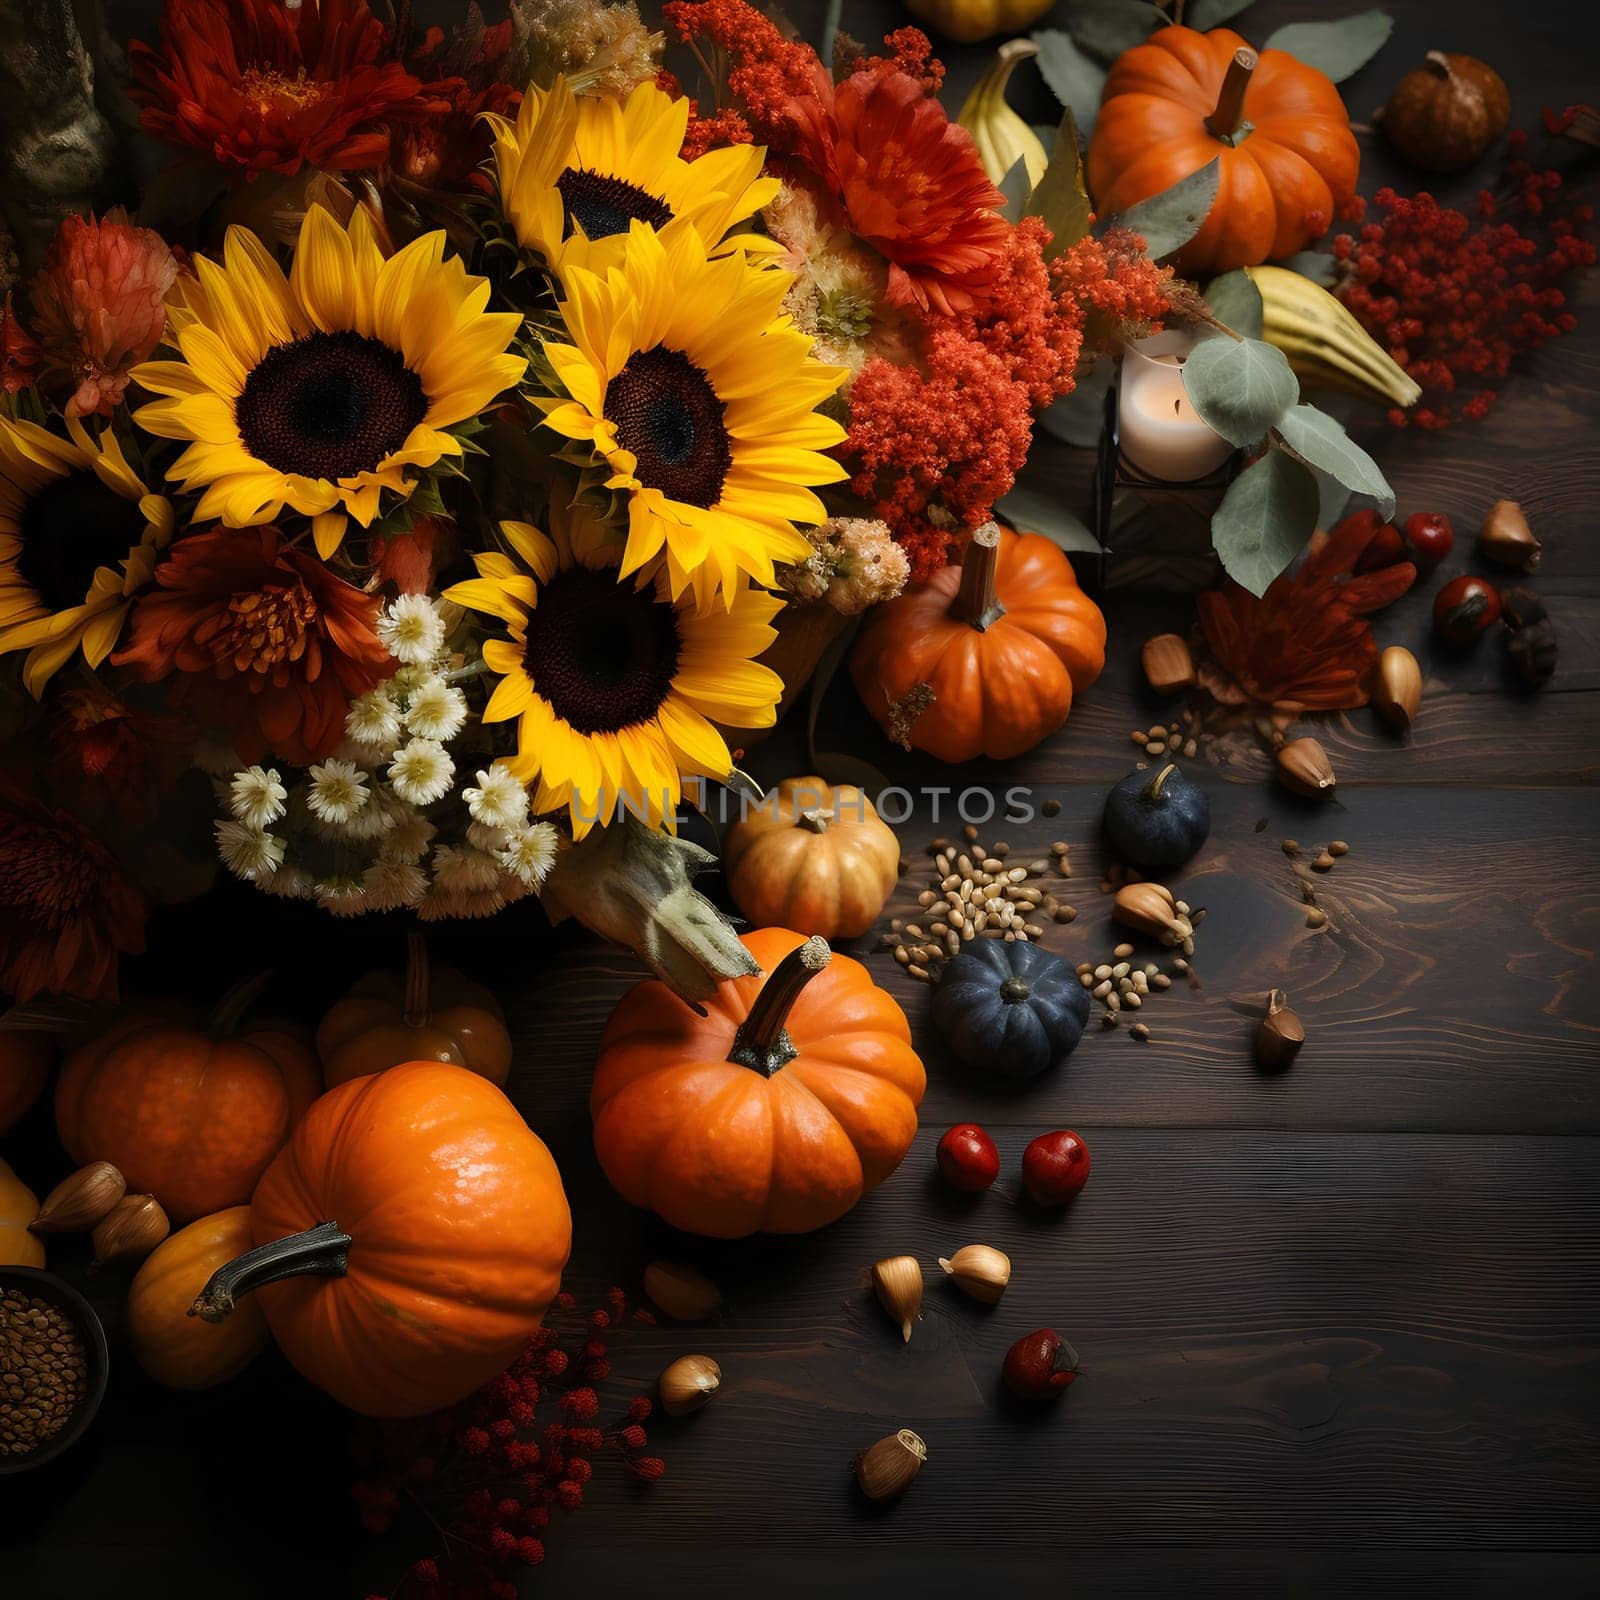 Aerial view of colorful flowers, pumpkins, harvest from the field on wooden boards. Pumpkin as a dish of thanksgiving for the harvest. by ThemesS